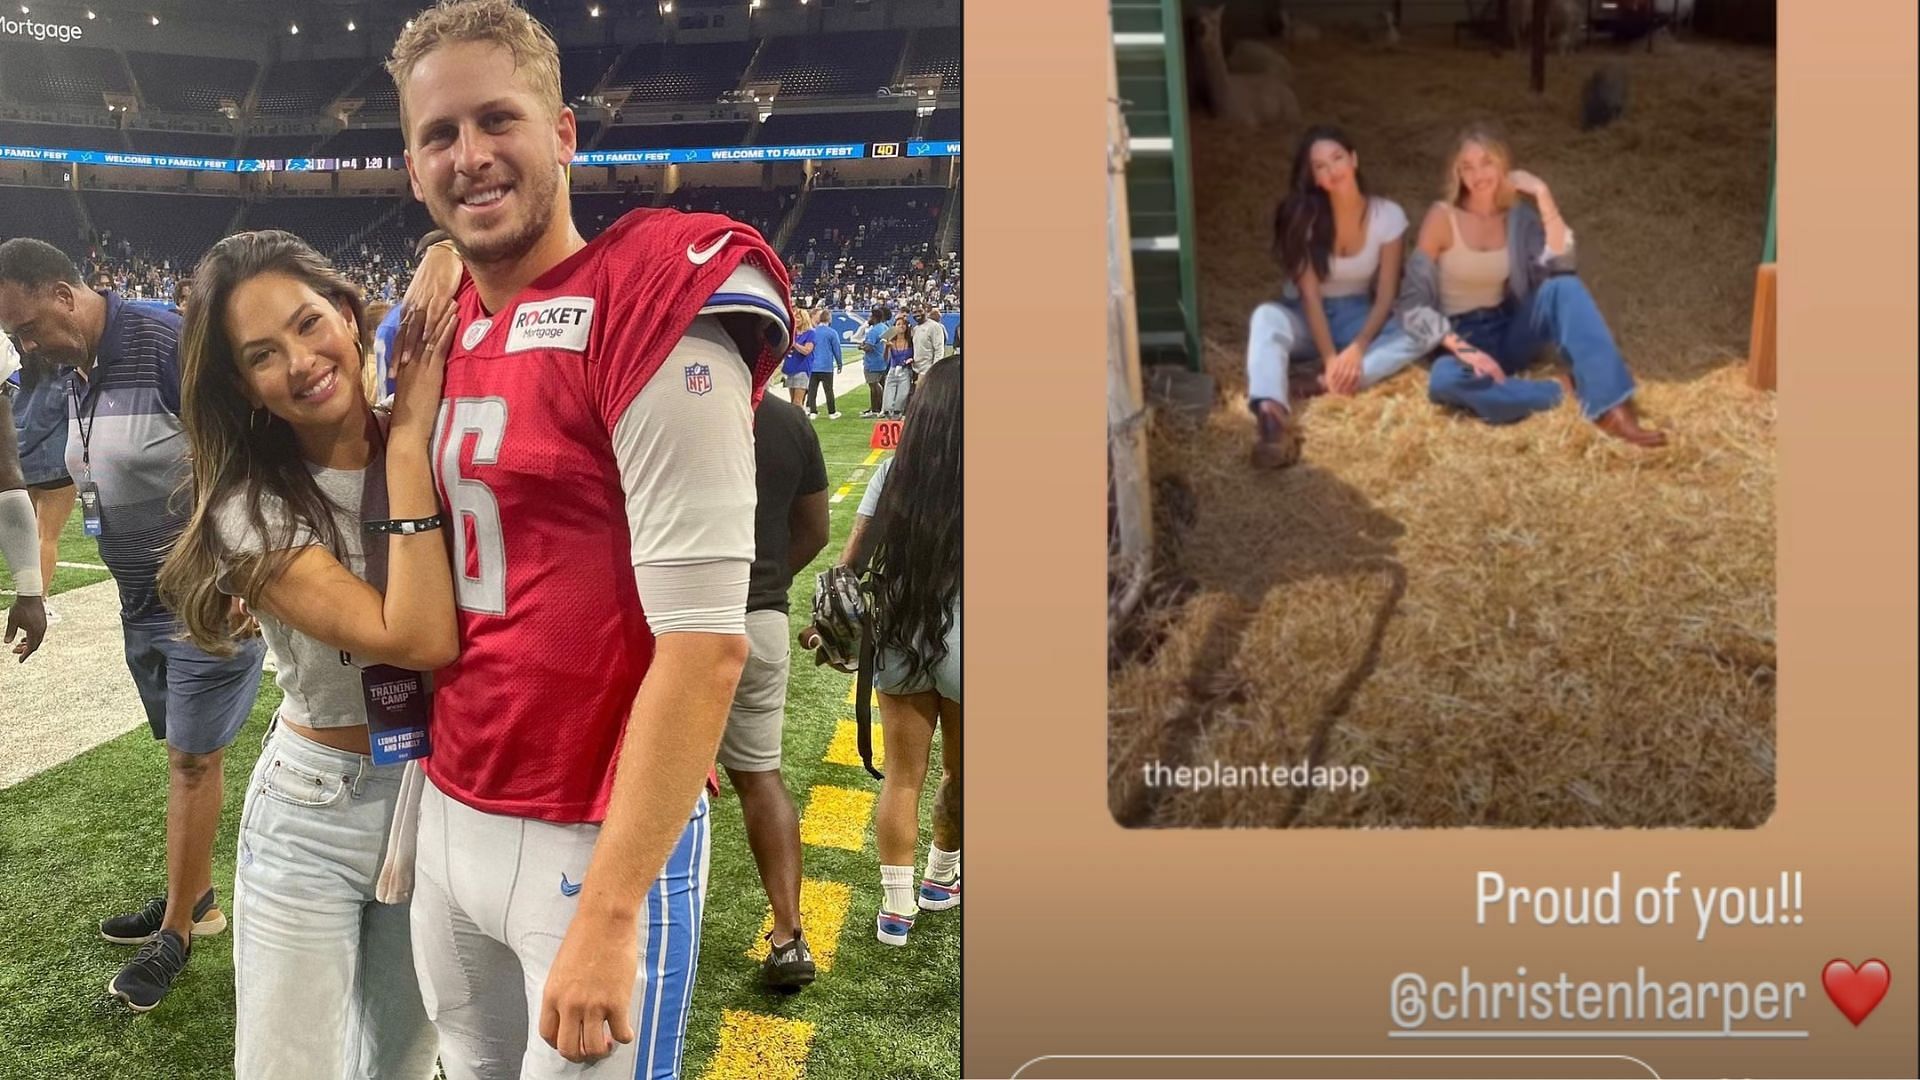 Jared Goff extend his supports for Christen Harper.